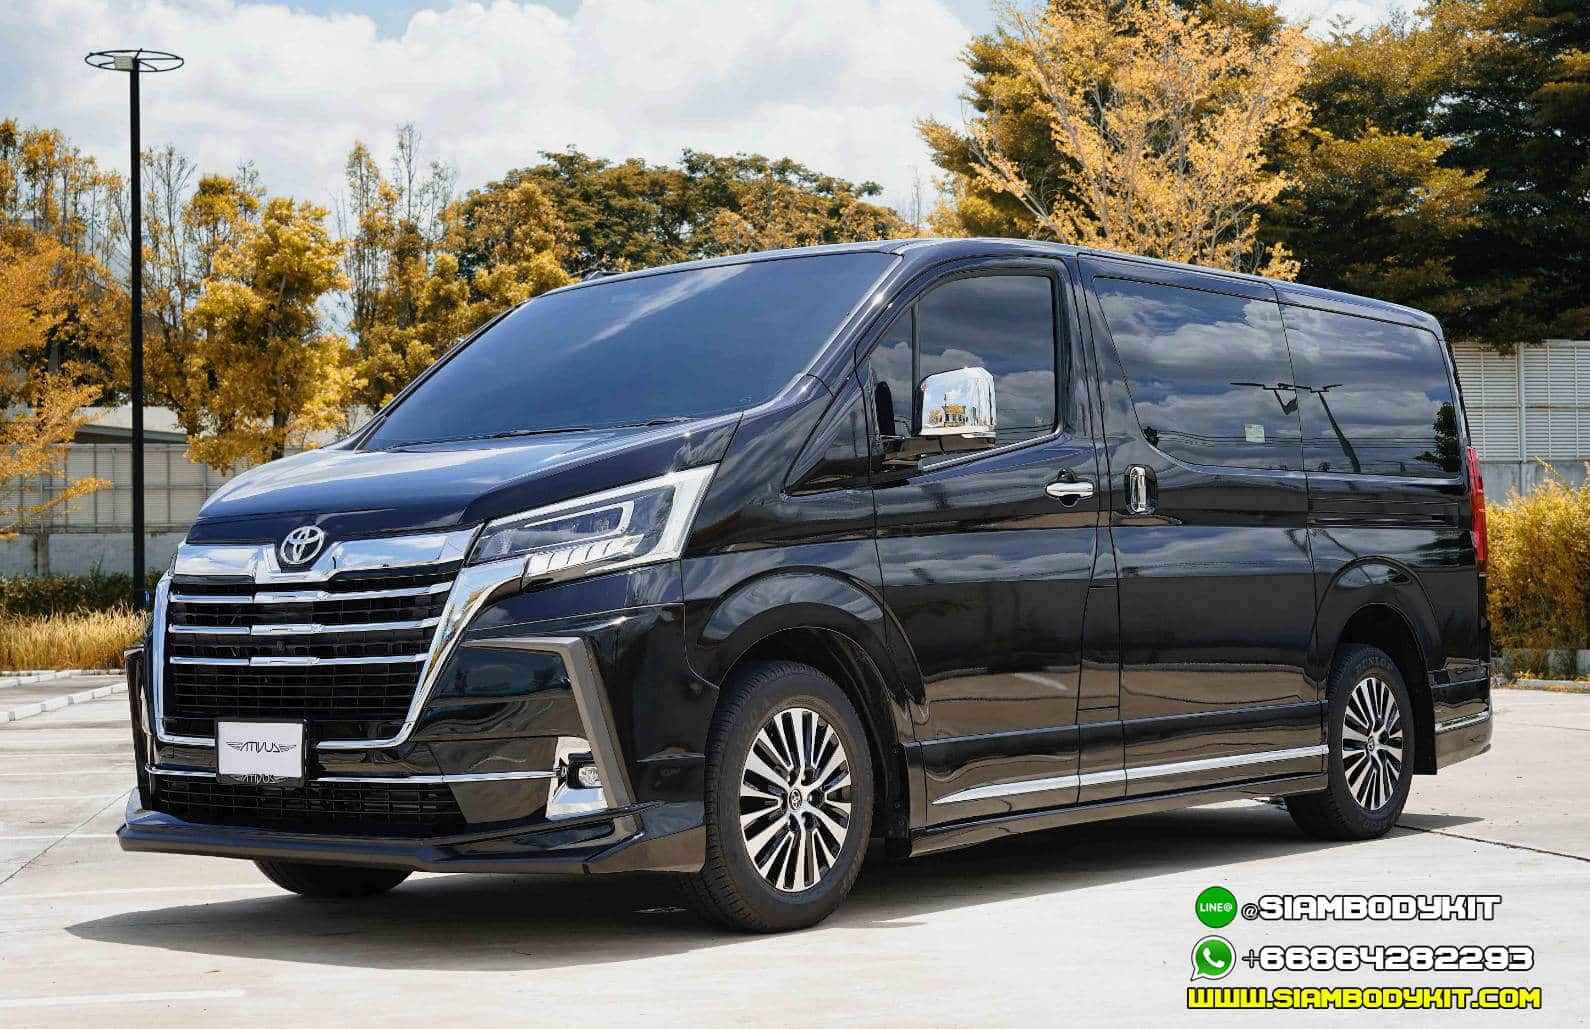 ATIVUS Bodykit for Toyota Majesty 2019-2020 (COLOR)